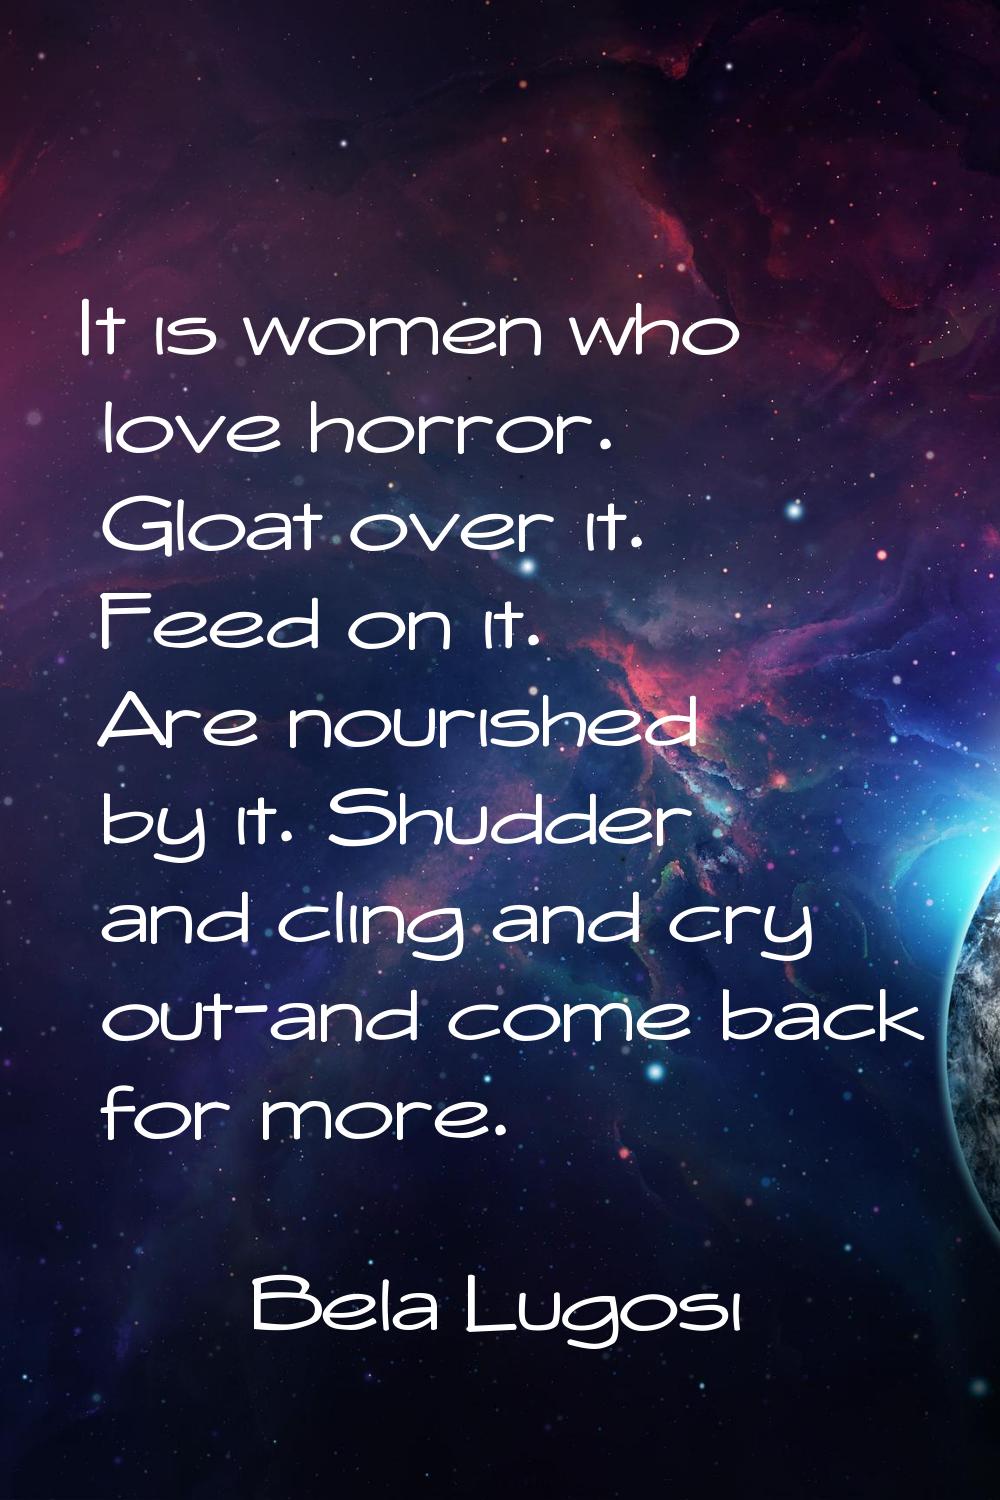 It is women who love horror. Gloat over it. Feed on it. Are nourished by it. Shudder and cling and 